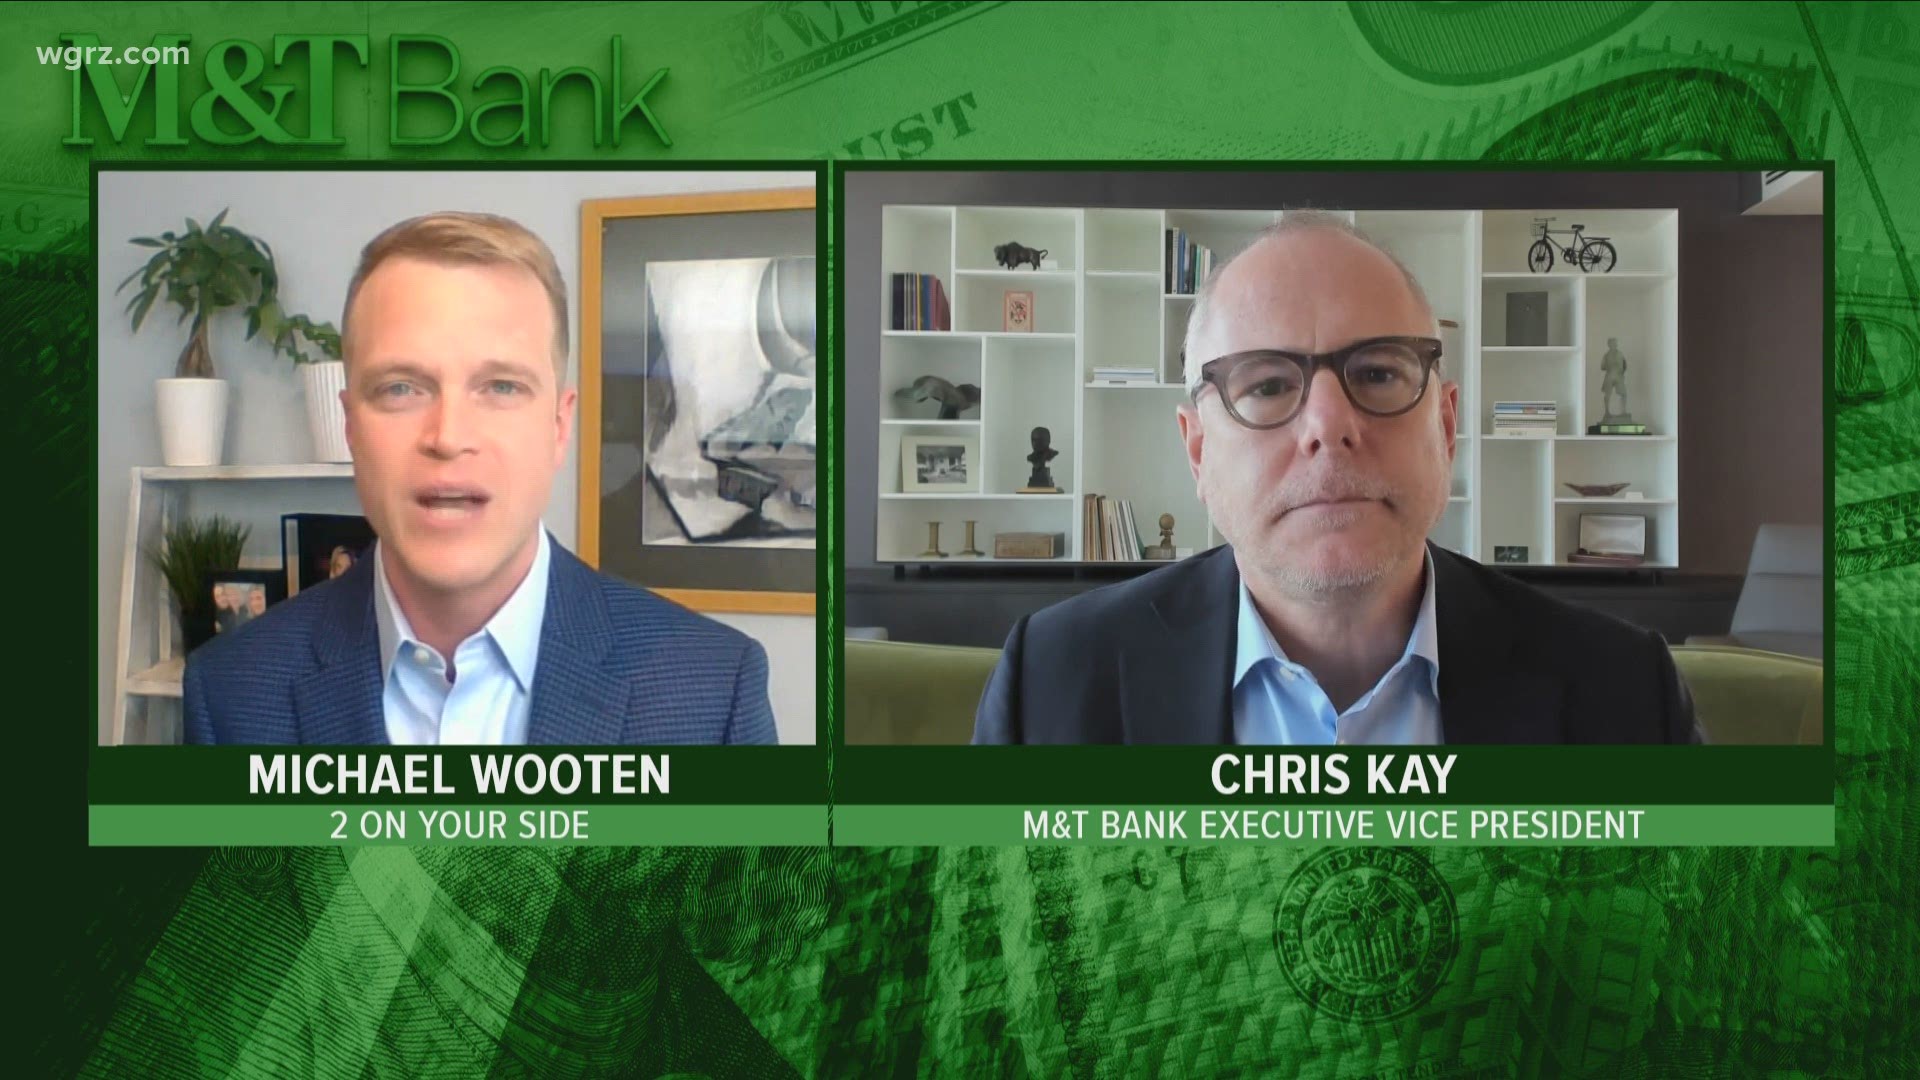 I talked about that with Chris Kay.
He leads all aspects of consumer and business banking as executive vice president at M and T Bank.